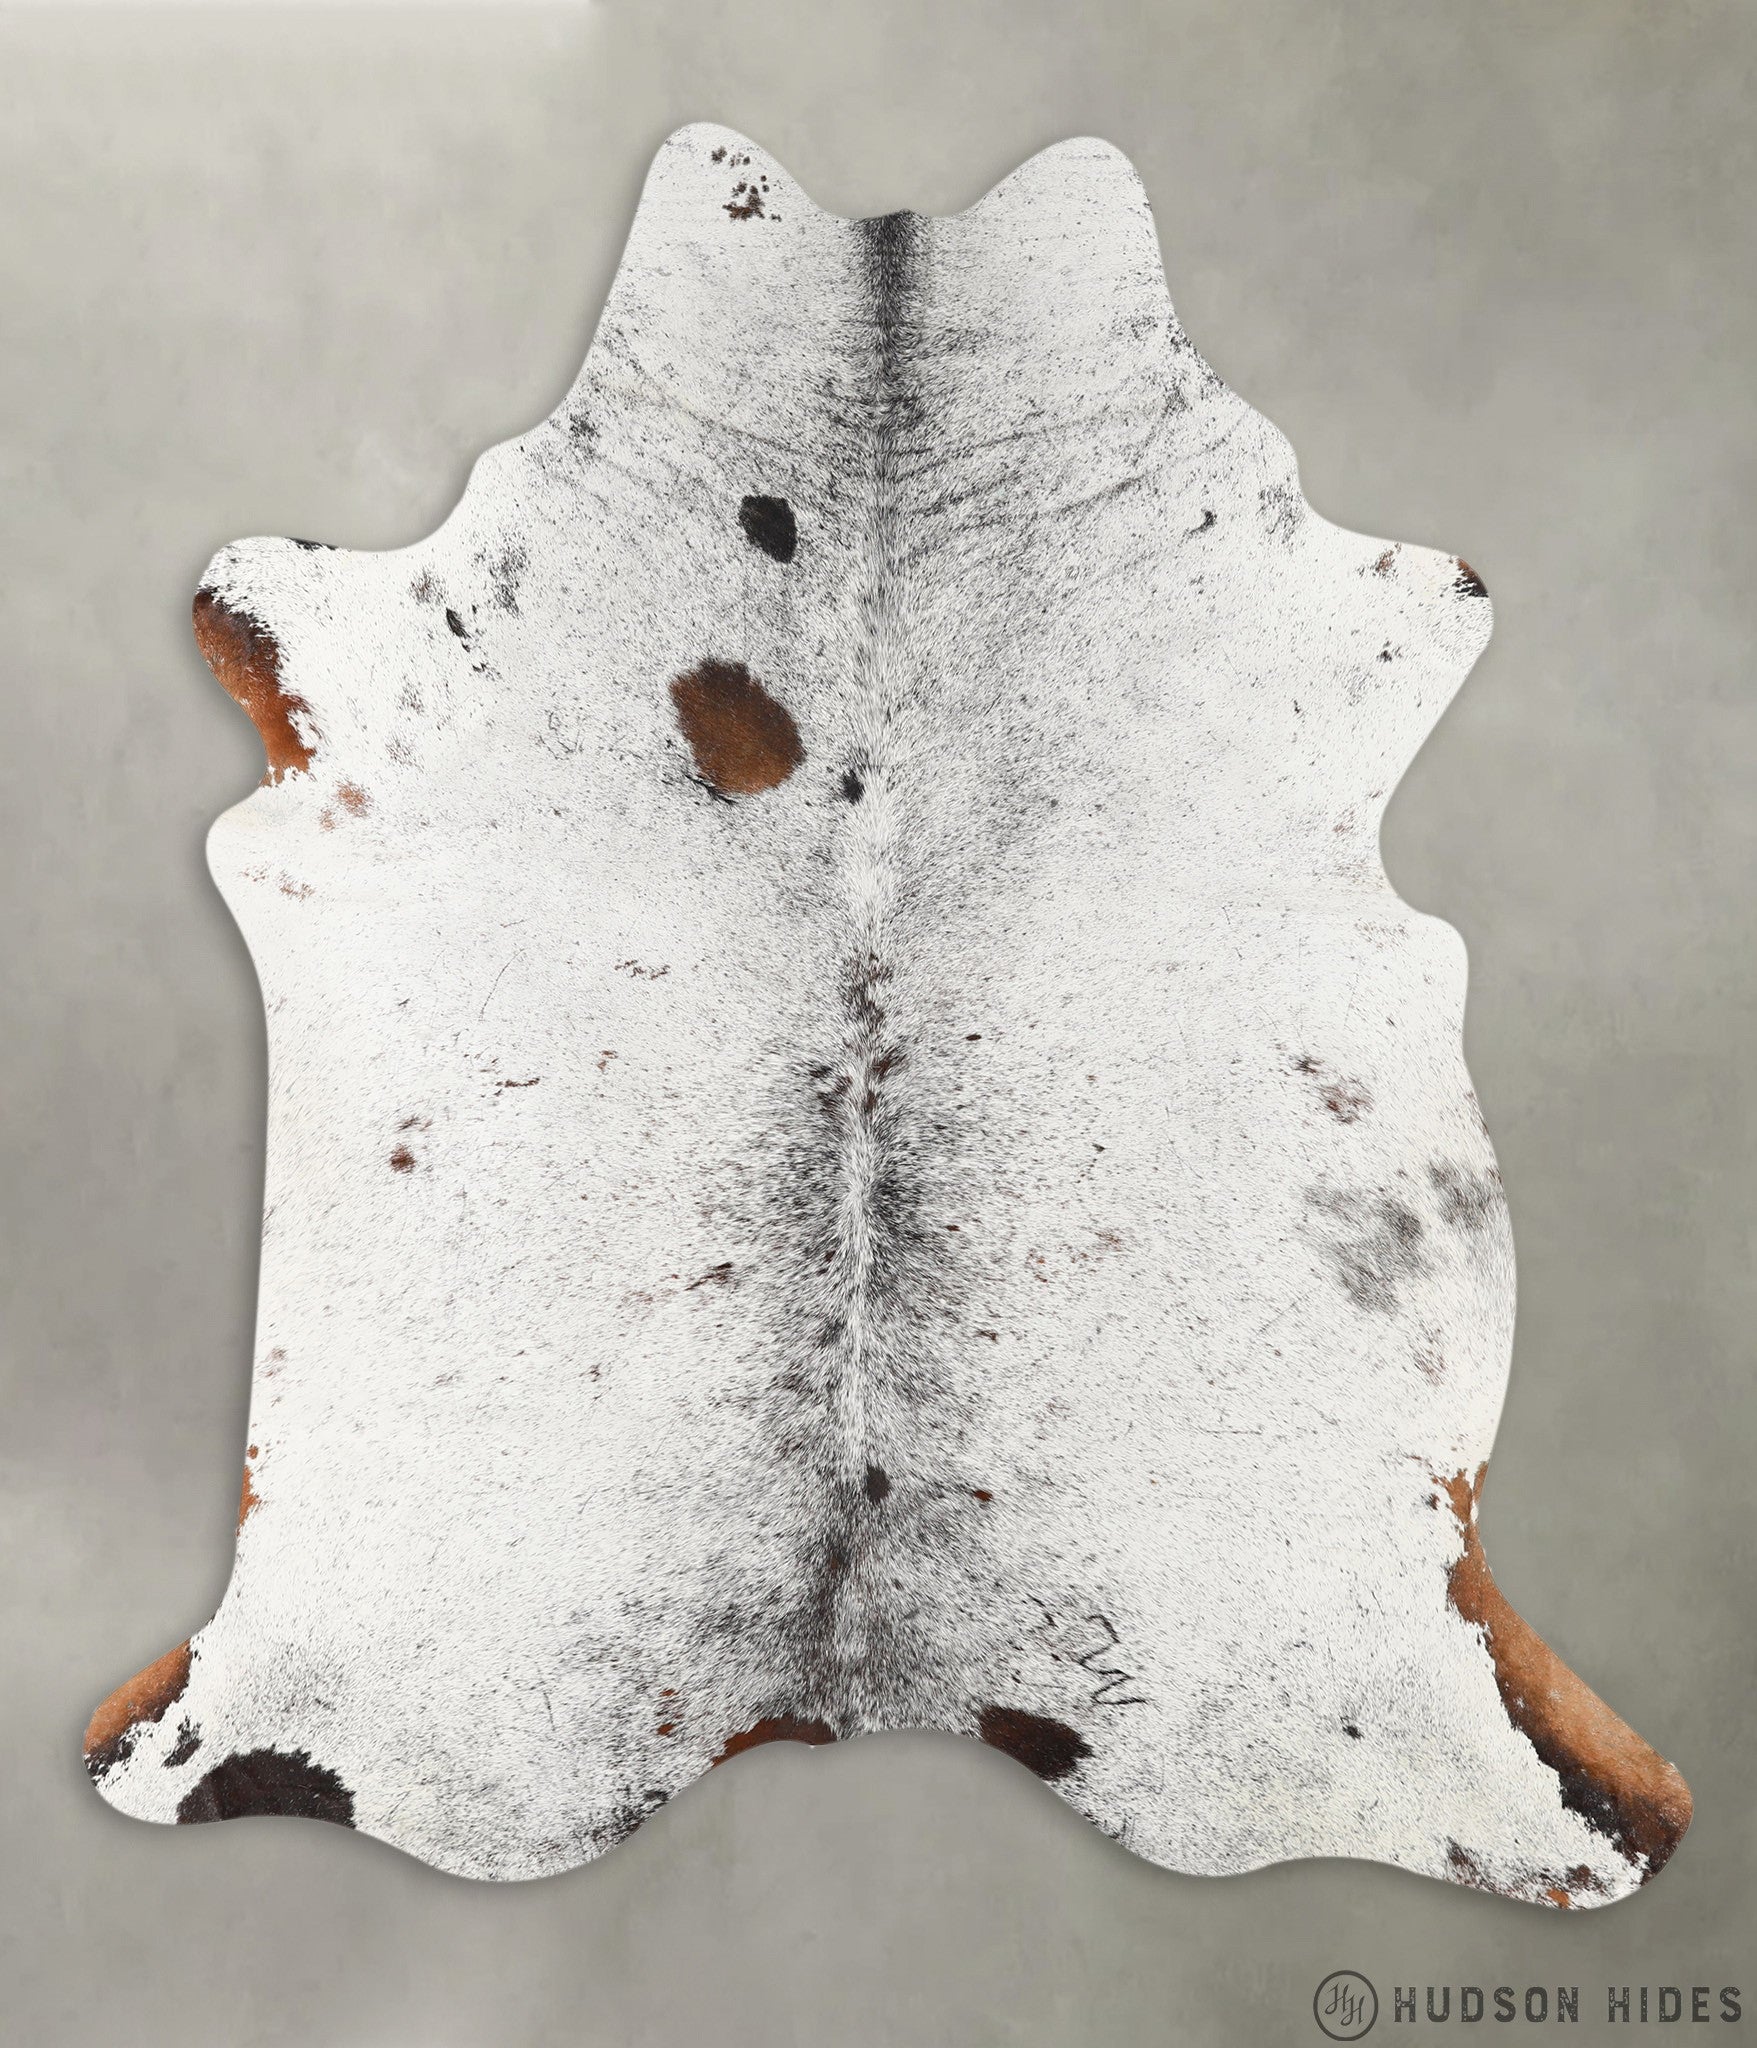 Salt and Pepper Brown X-Large Brazilian Cowhide Rug 7'5"H x 6'8"W #22907 by Hudson Hides